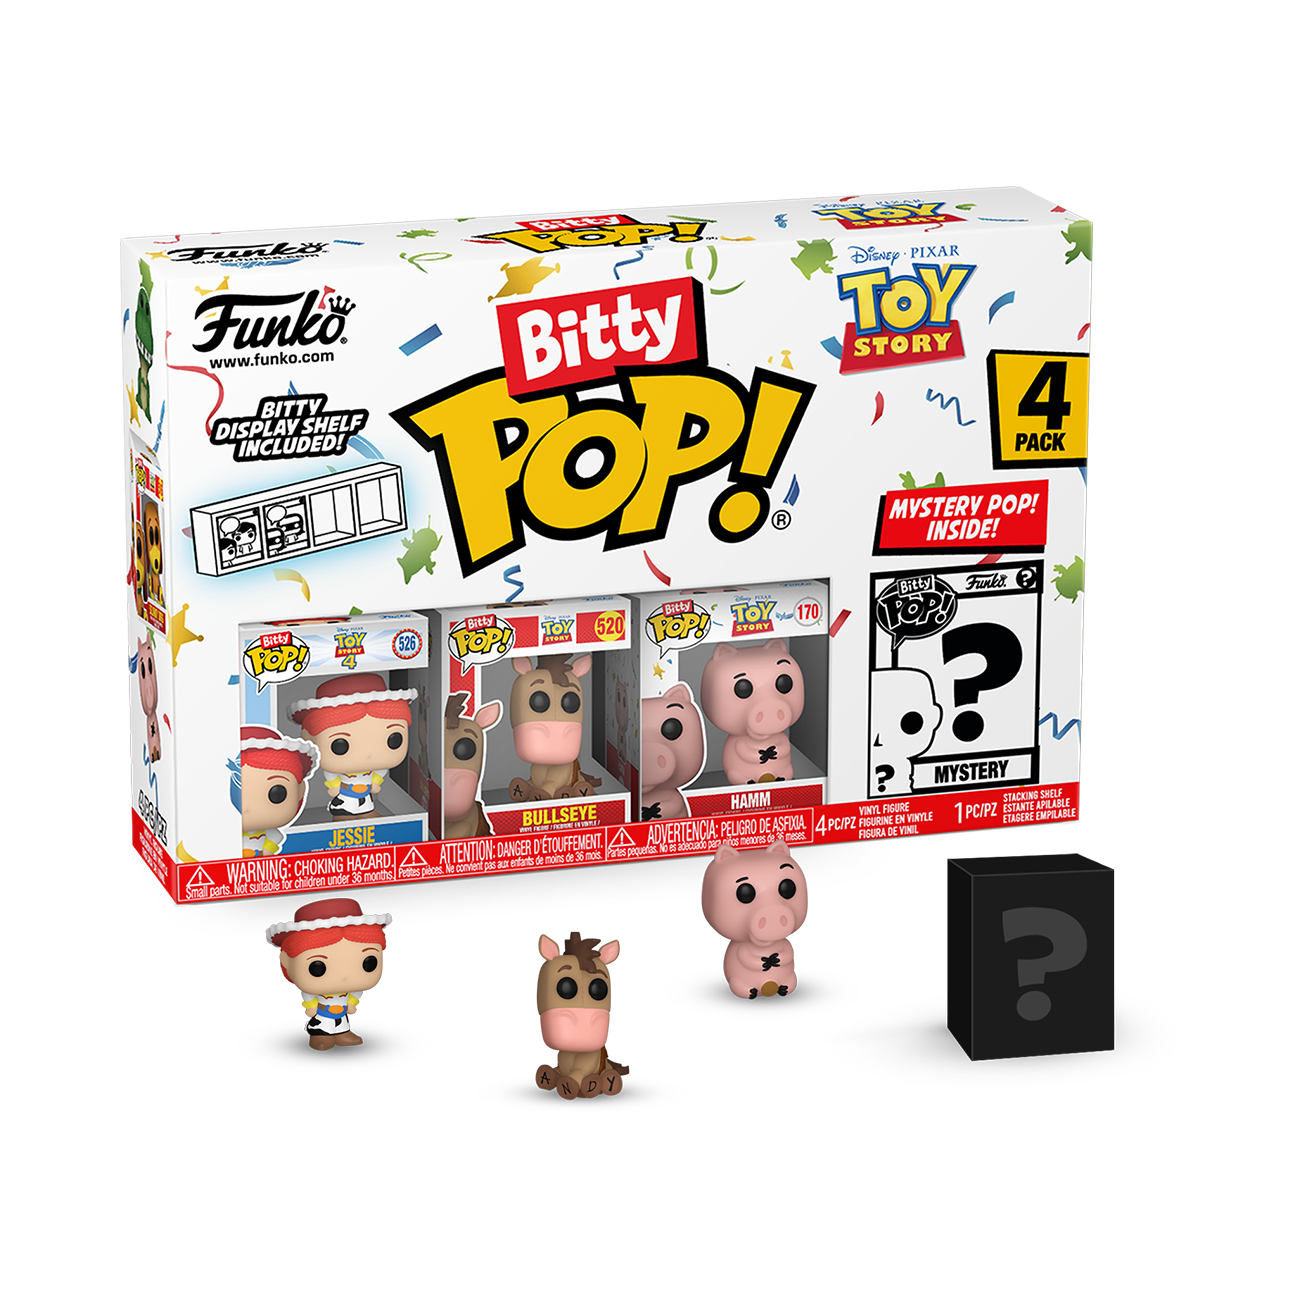 Funko Pop Toy Story Checklist, Gallery, Exclusives List, Variants